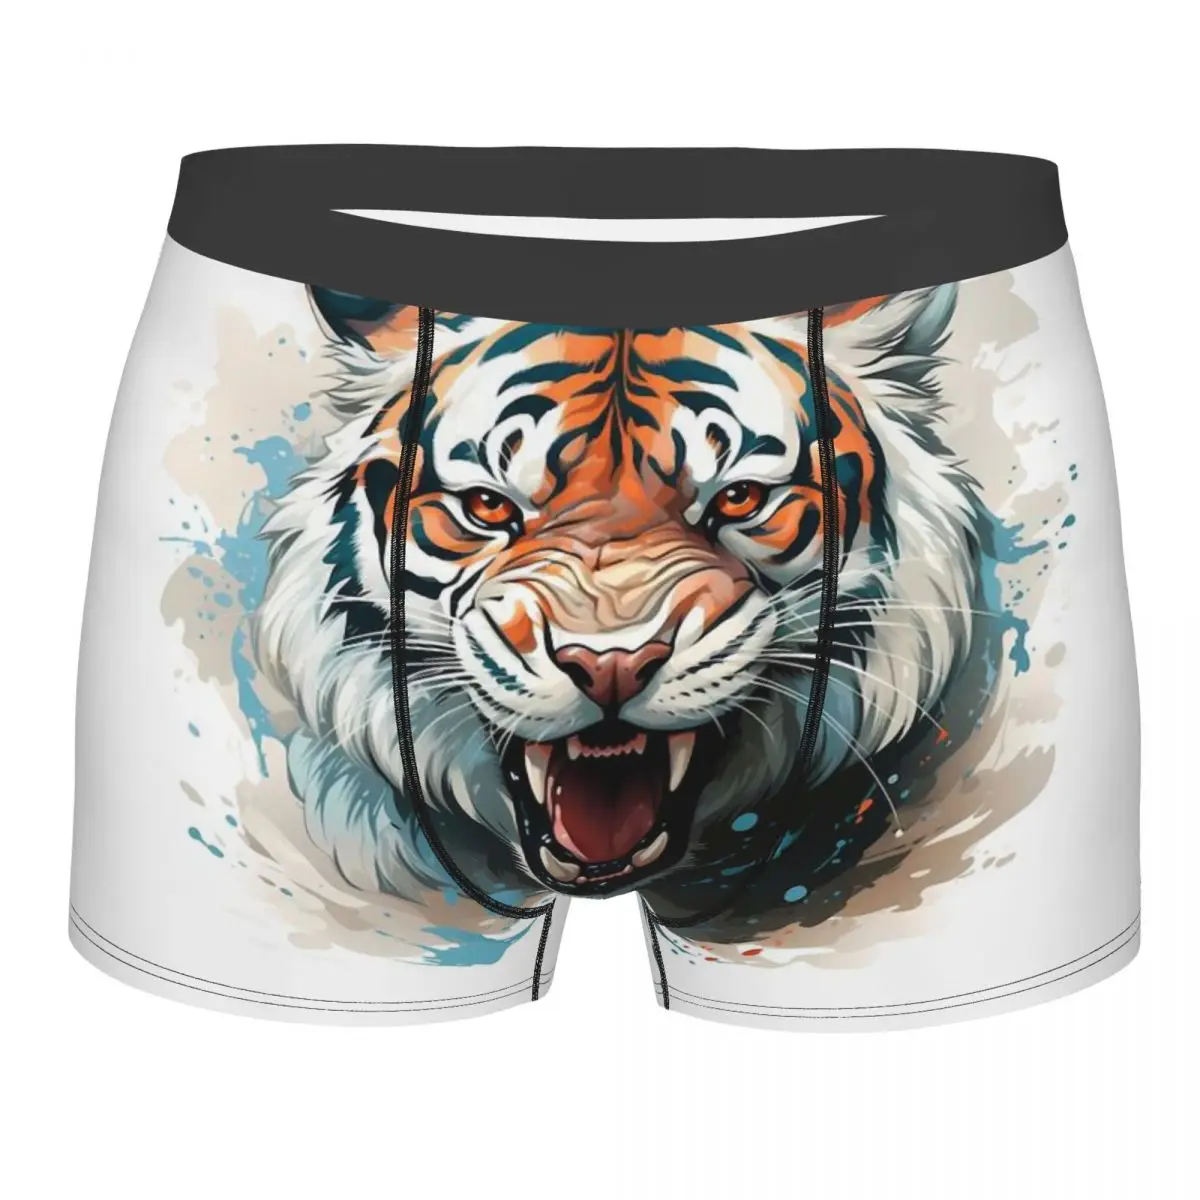 Cool Animals, Lions, Tigers, Mencosy Boxer Briefs,3D printing Underwear, Highly Breathable Top Quality Gift Idea monster frankenstein men underwear highly breathable printing high quality gift idea